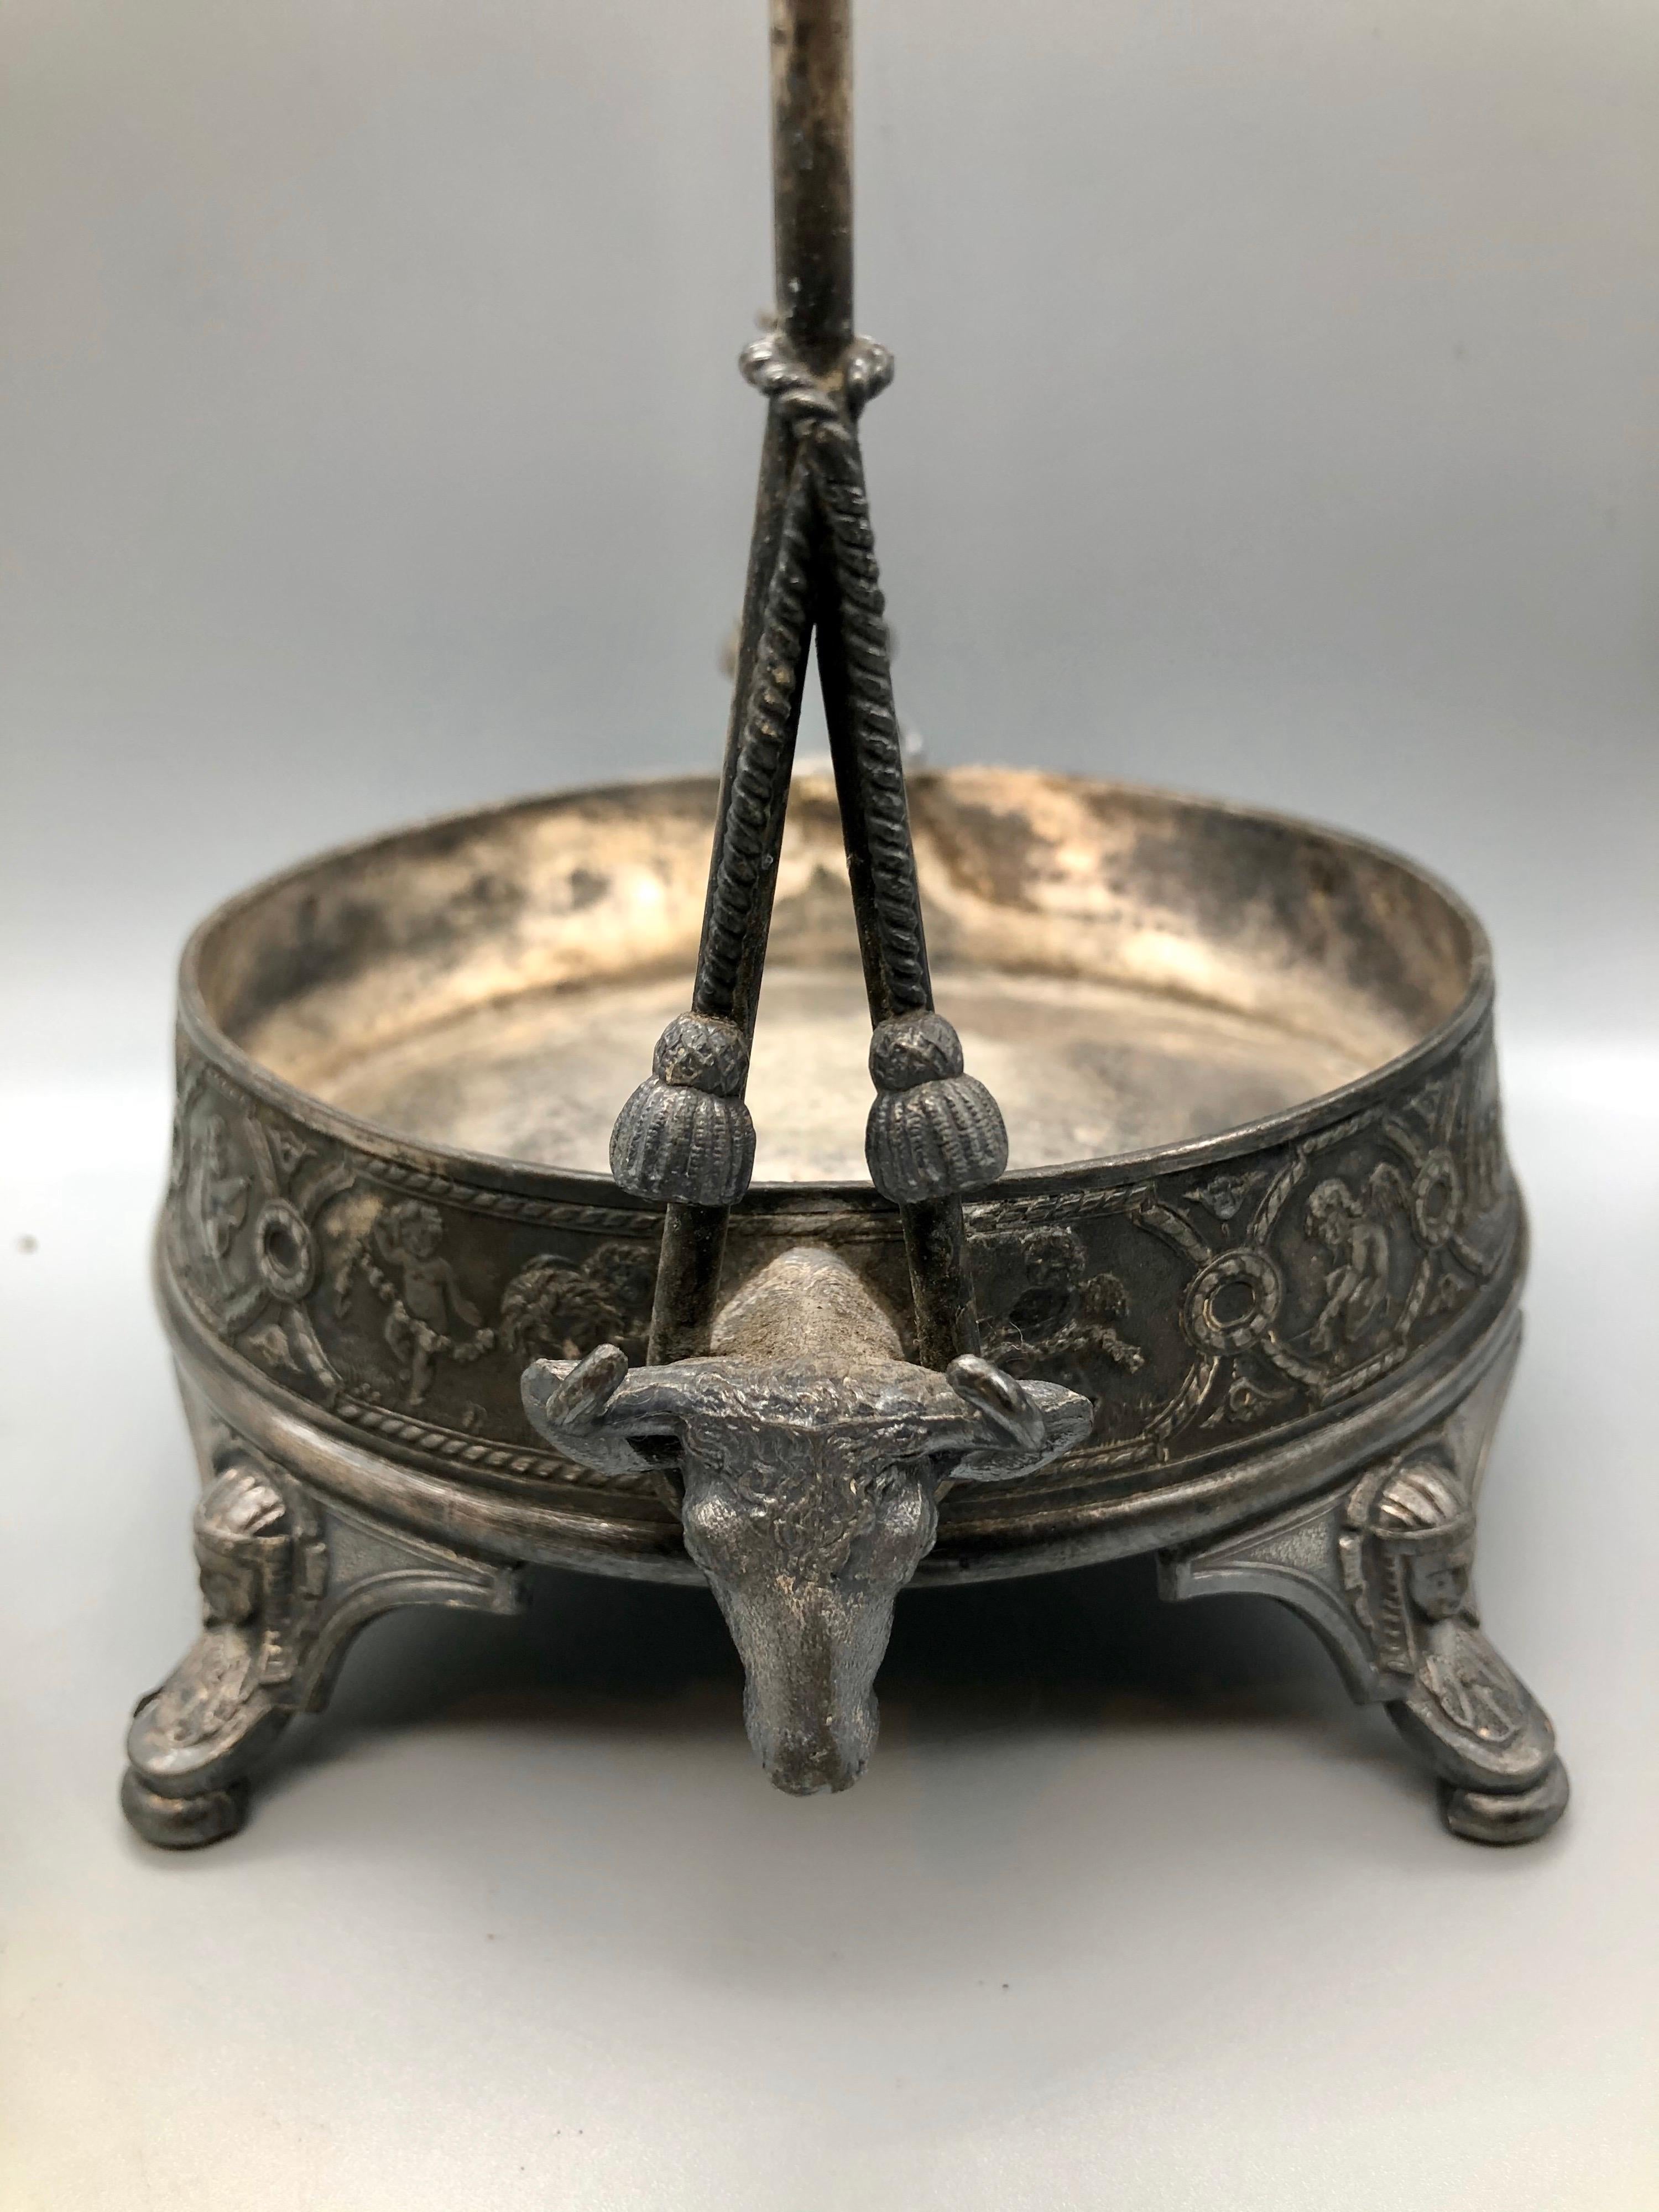 This antique cut-glass silver plated pickle caster dates from the late 1800s Victorian era. Note the exceptionally detailed design of angels at rest and play. Shows some age, but the detailing really sets this apart from other castors of the